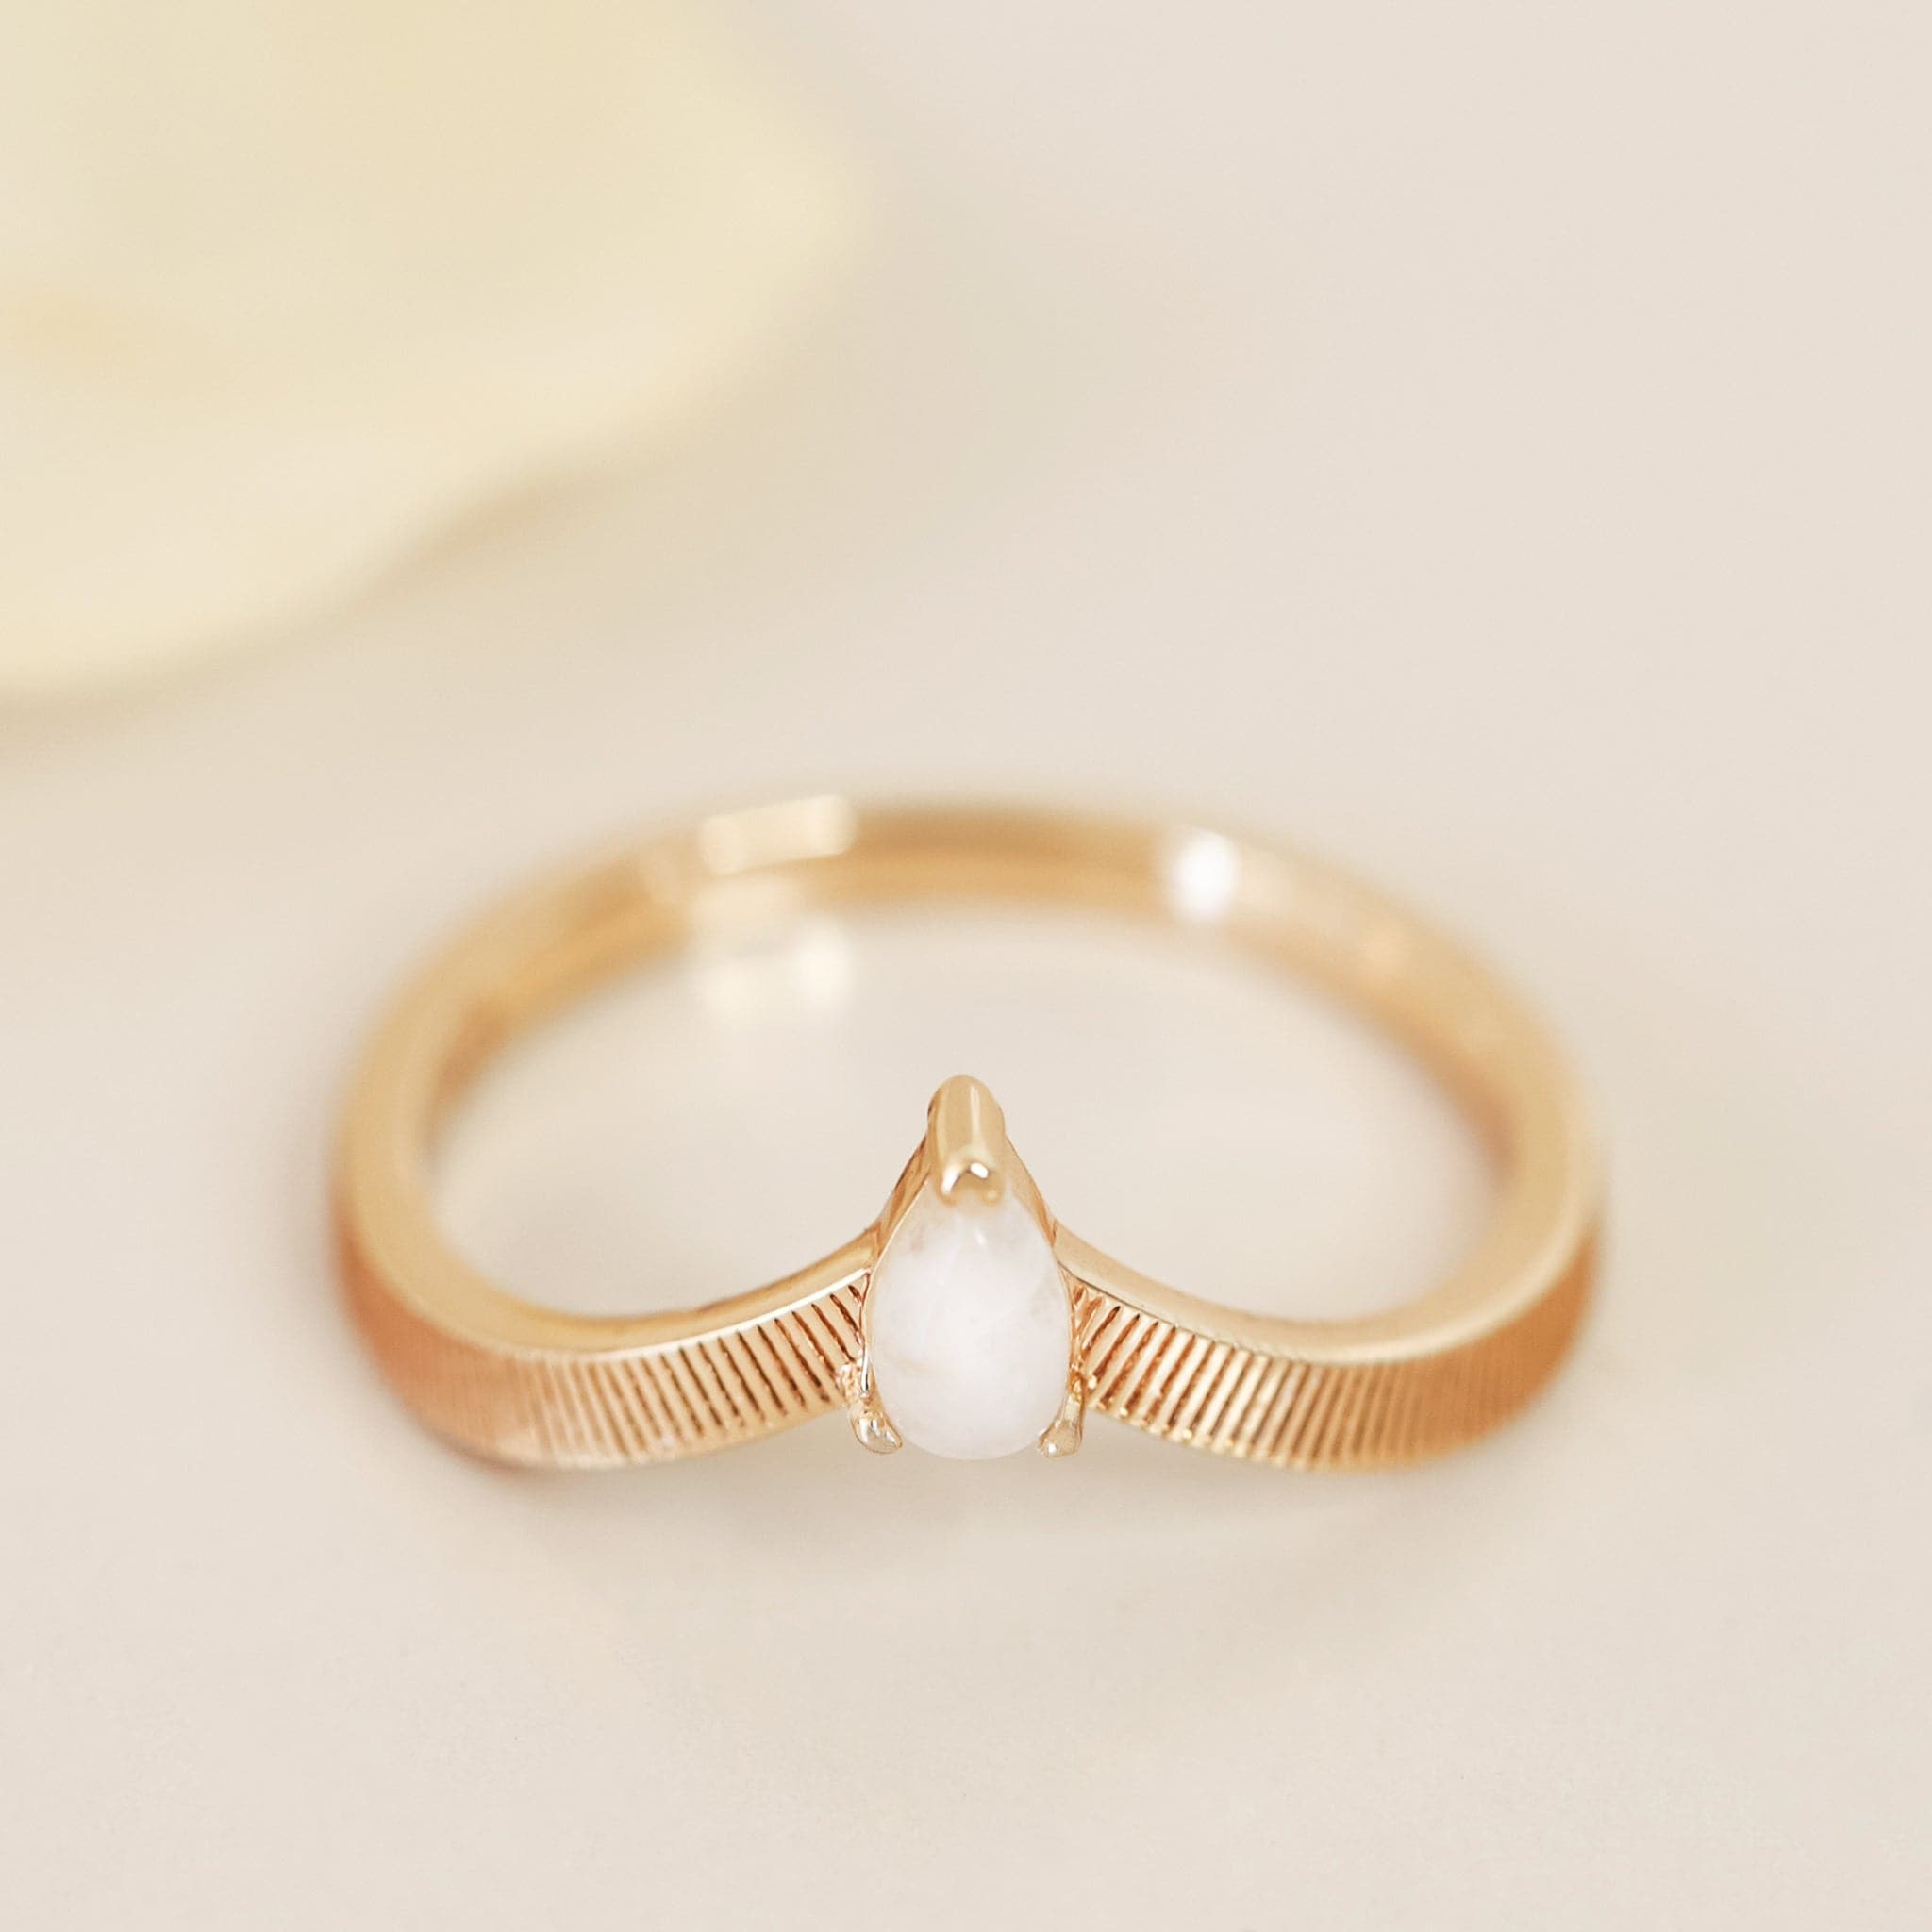 A gold band ring with etched line detailing and a white moonstone in the center.